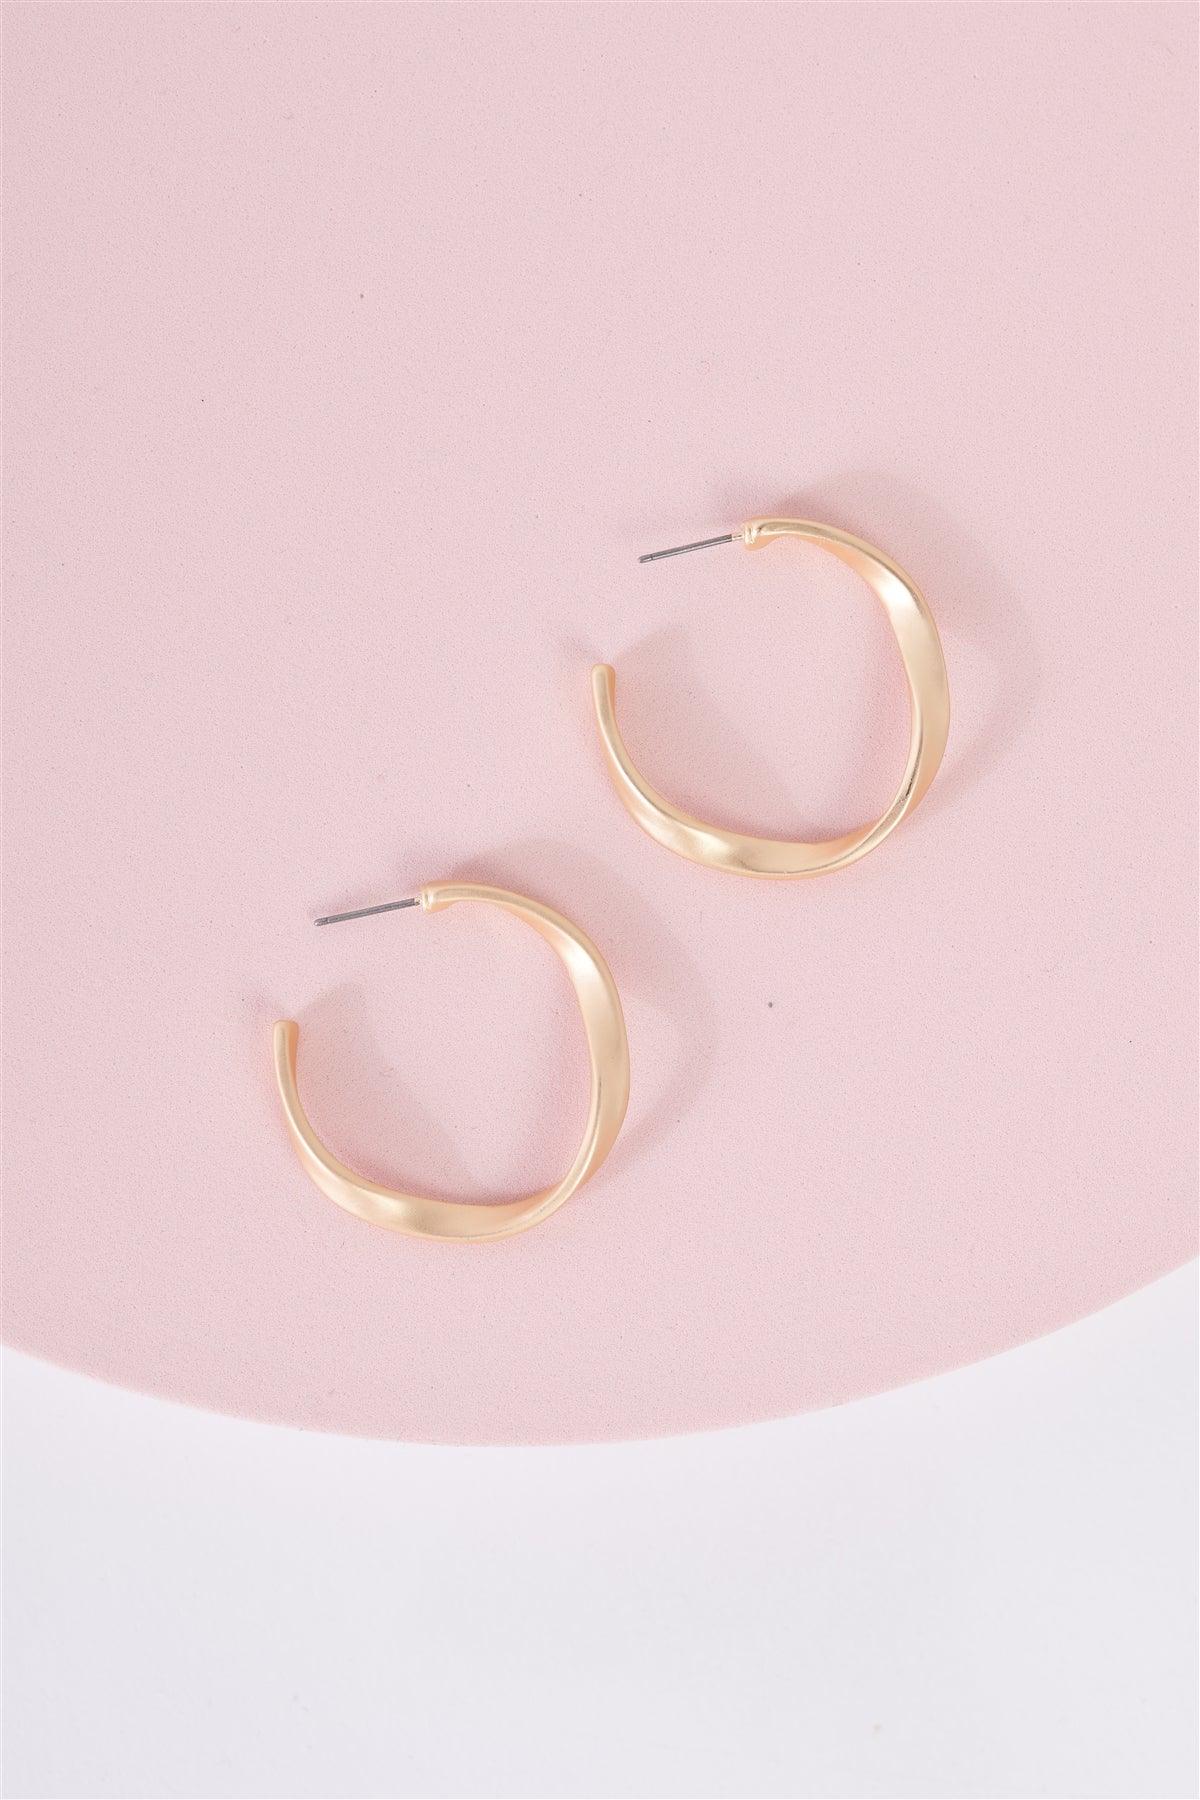 Matte Gold Twisted Circular Earrings /3 Pairs